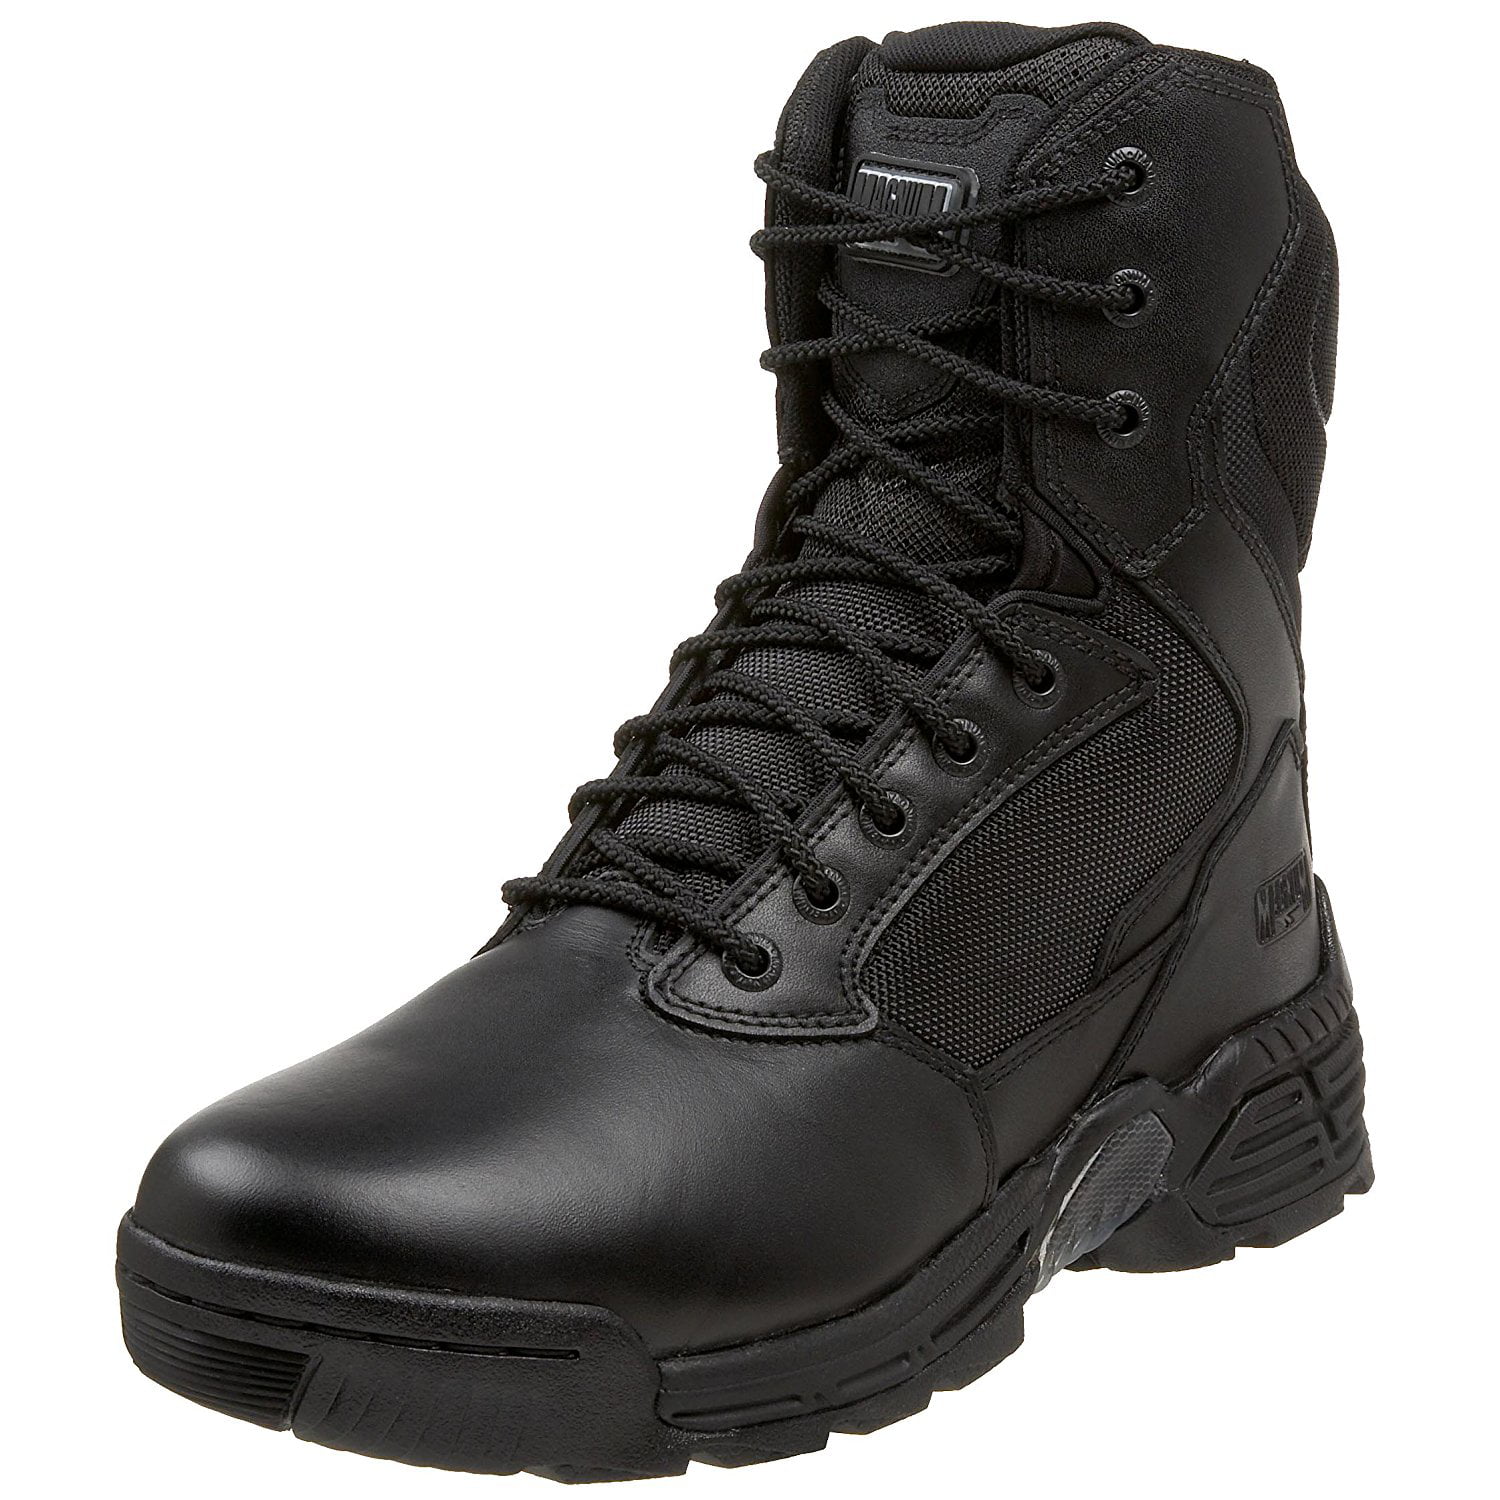 Security Hi-Tec Magnum Leather Boots Police Combat Black NON SAFETY Army 